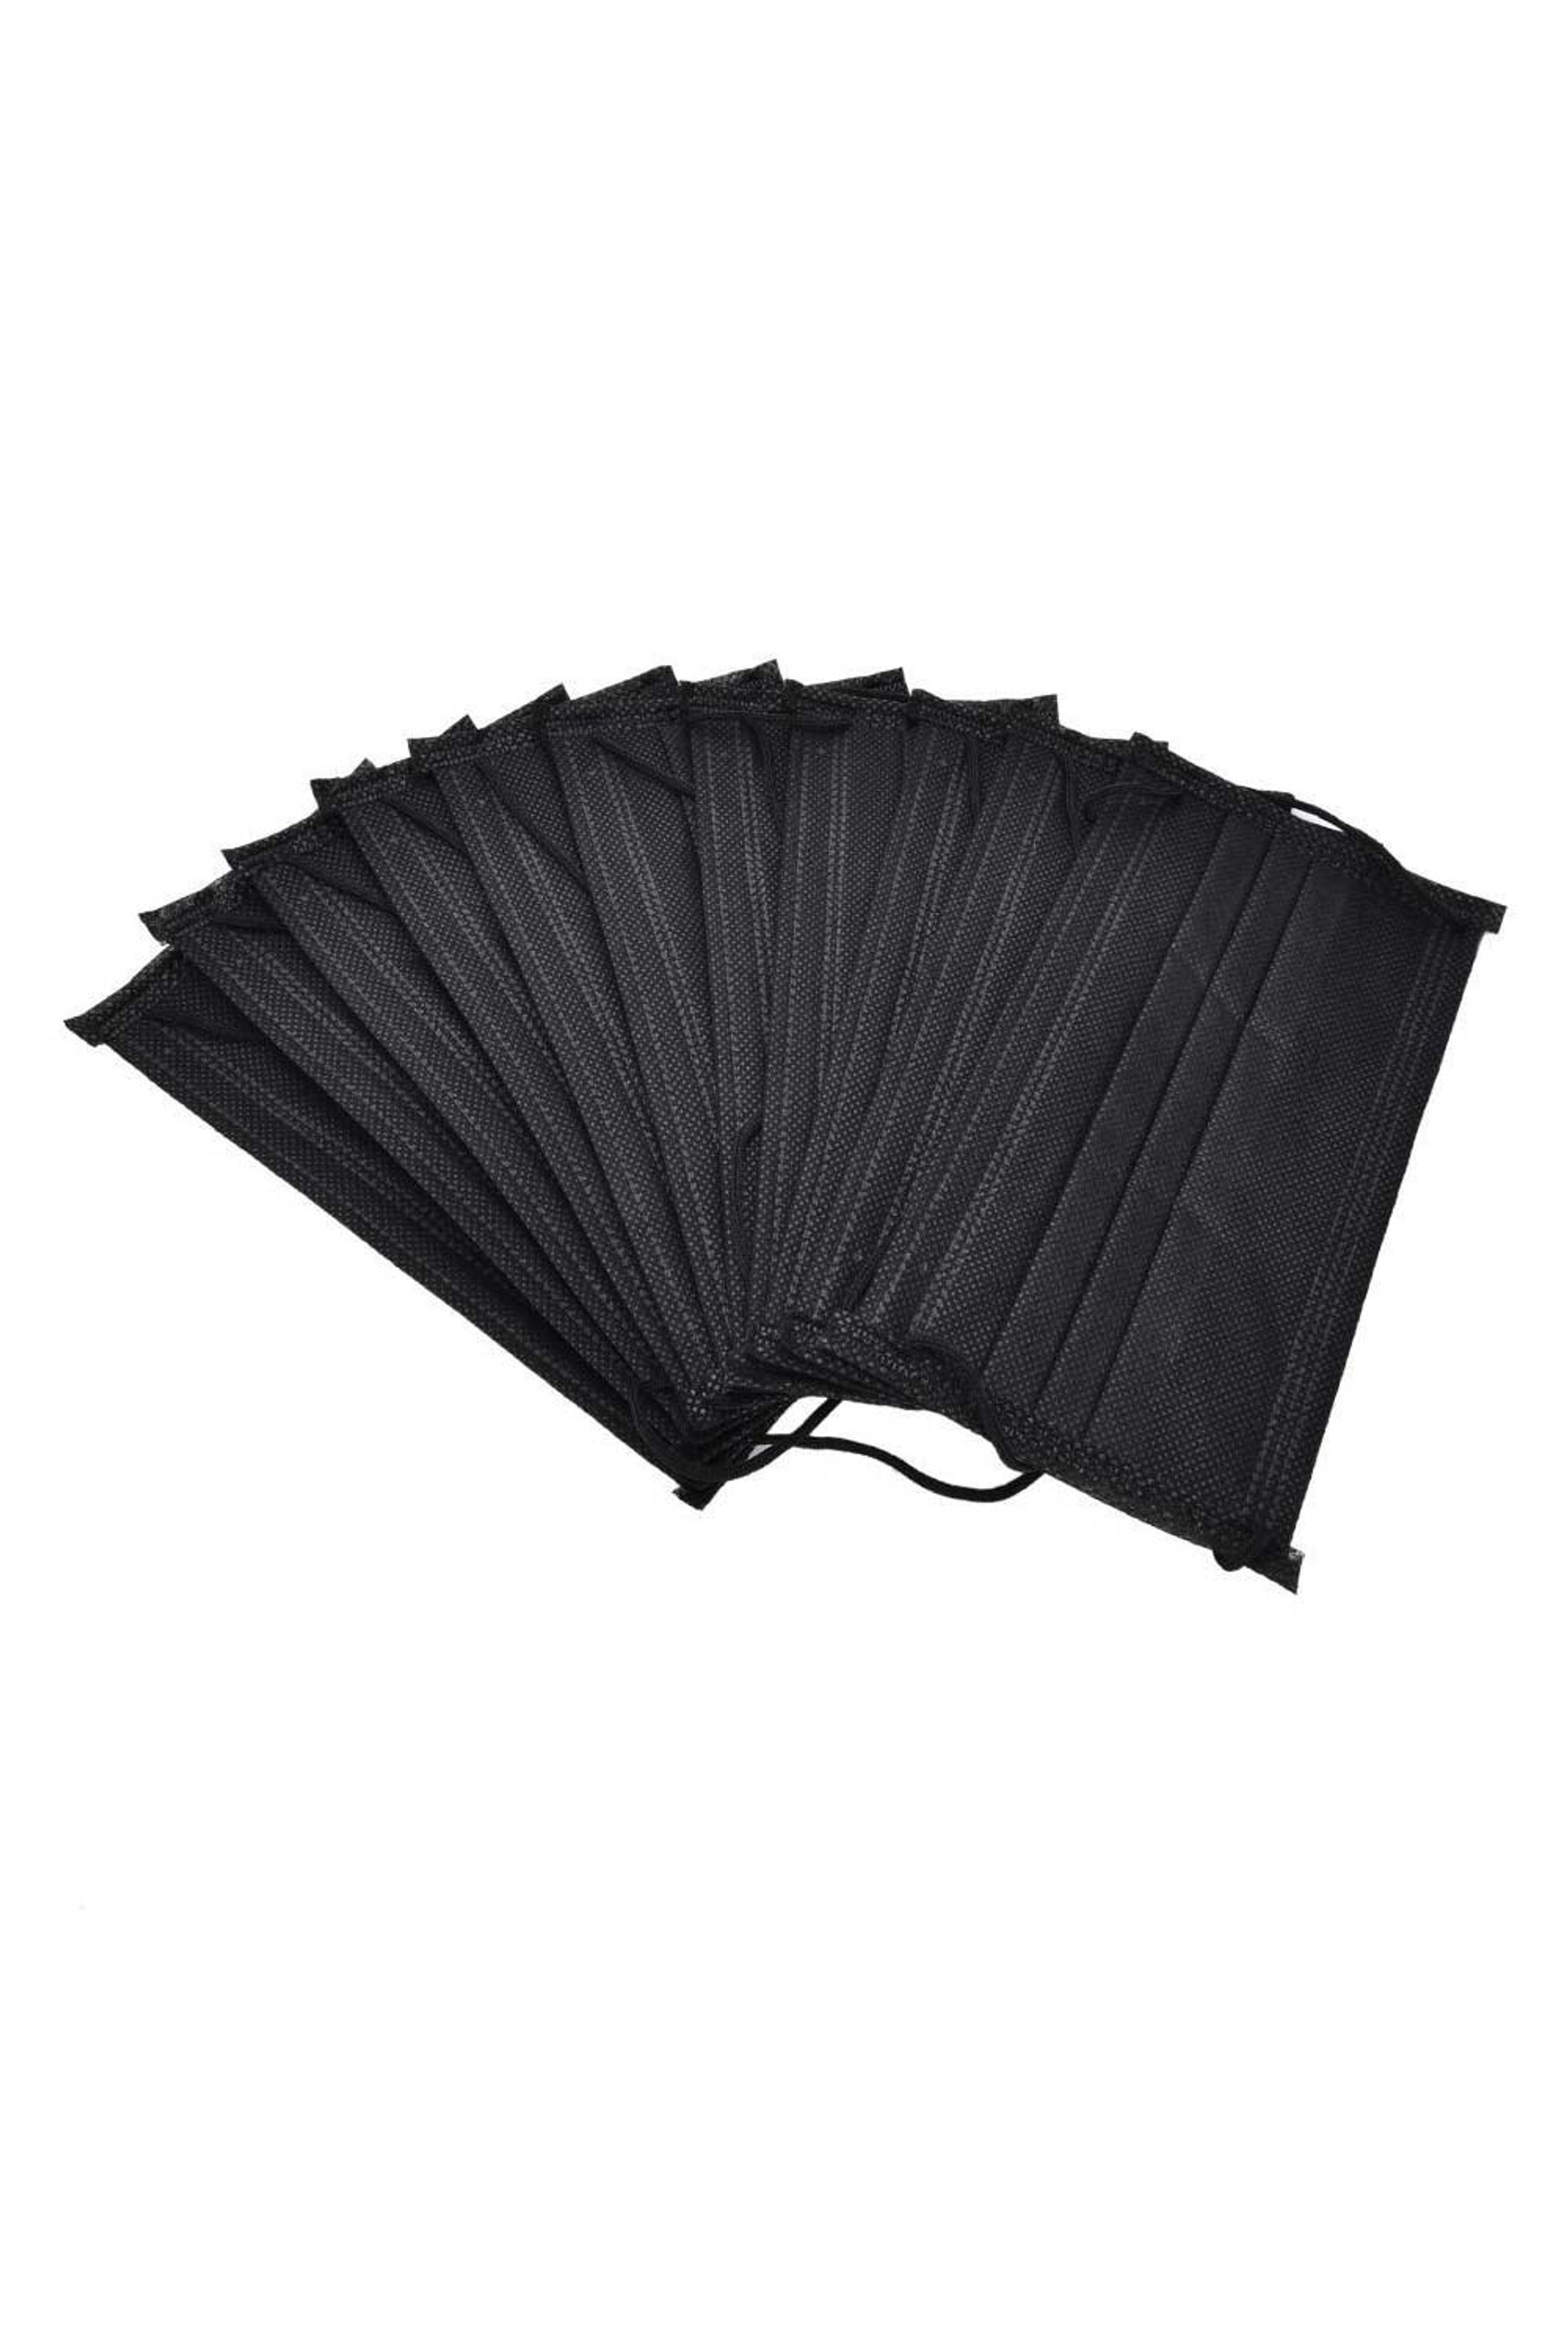 Black 4 Ply Disposable Face Masks - 10 Pack